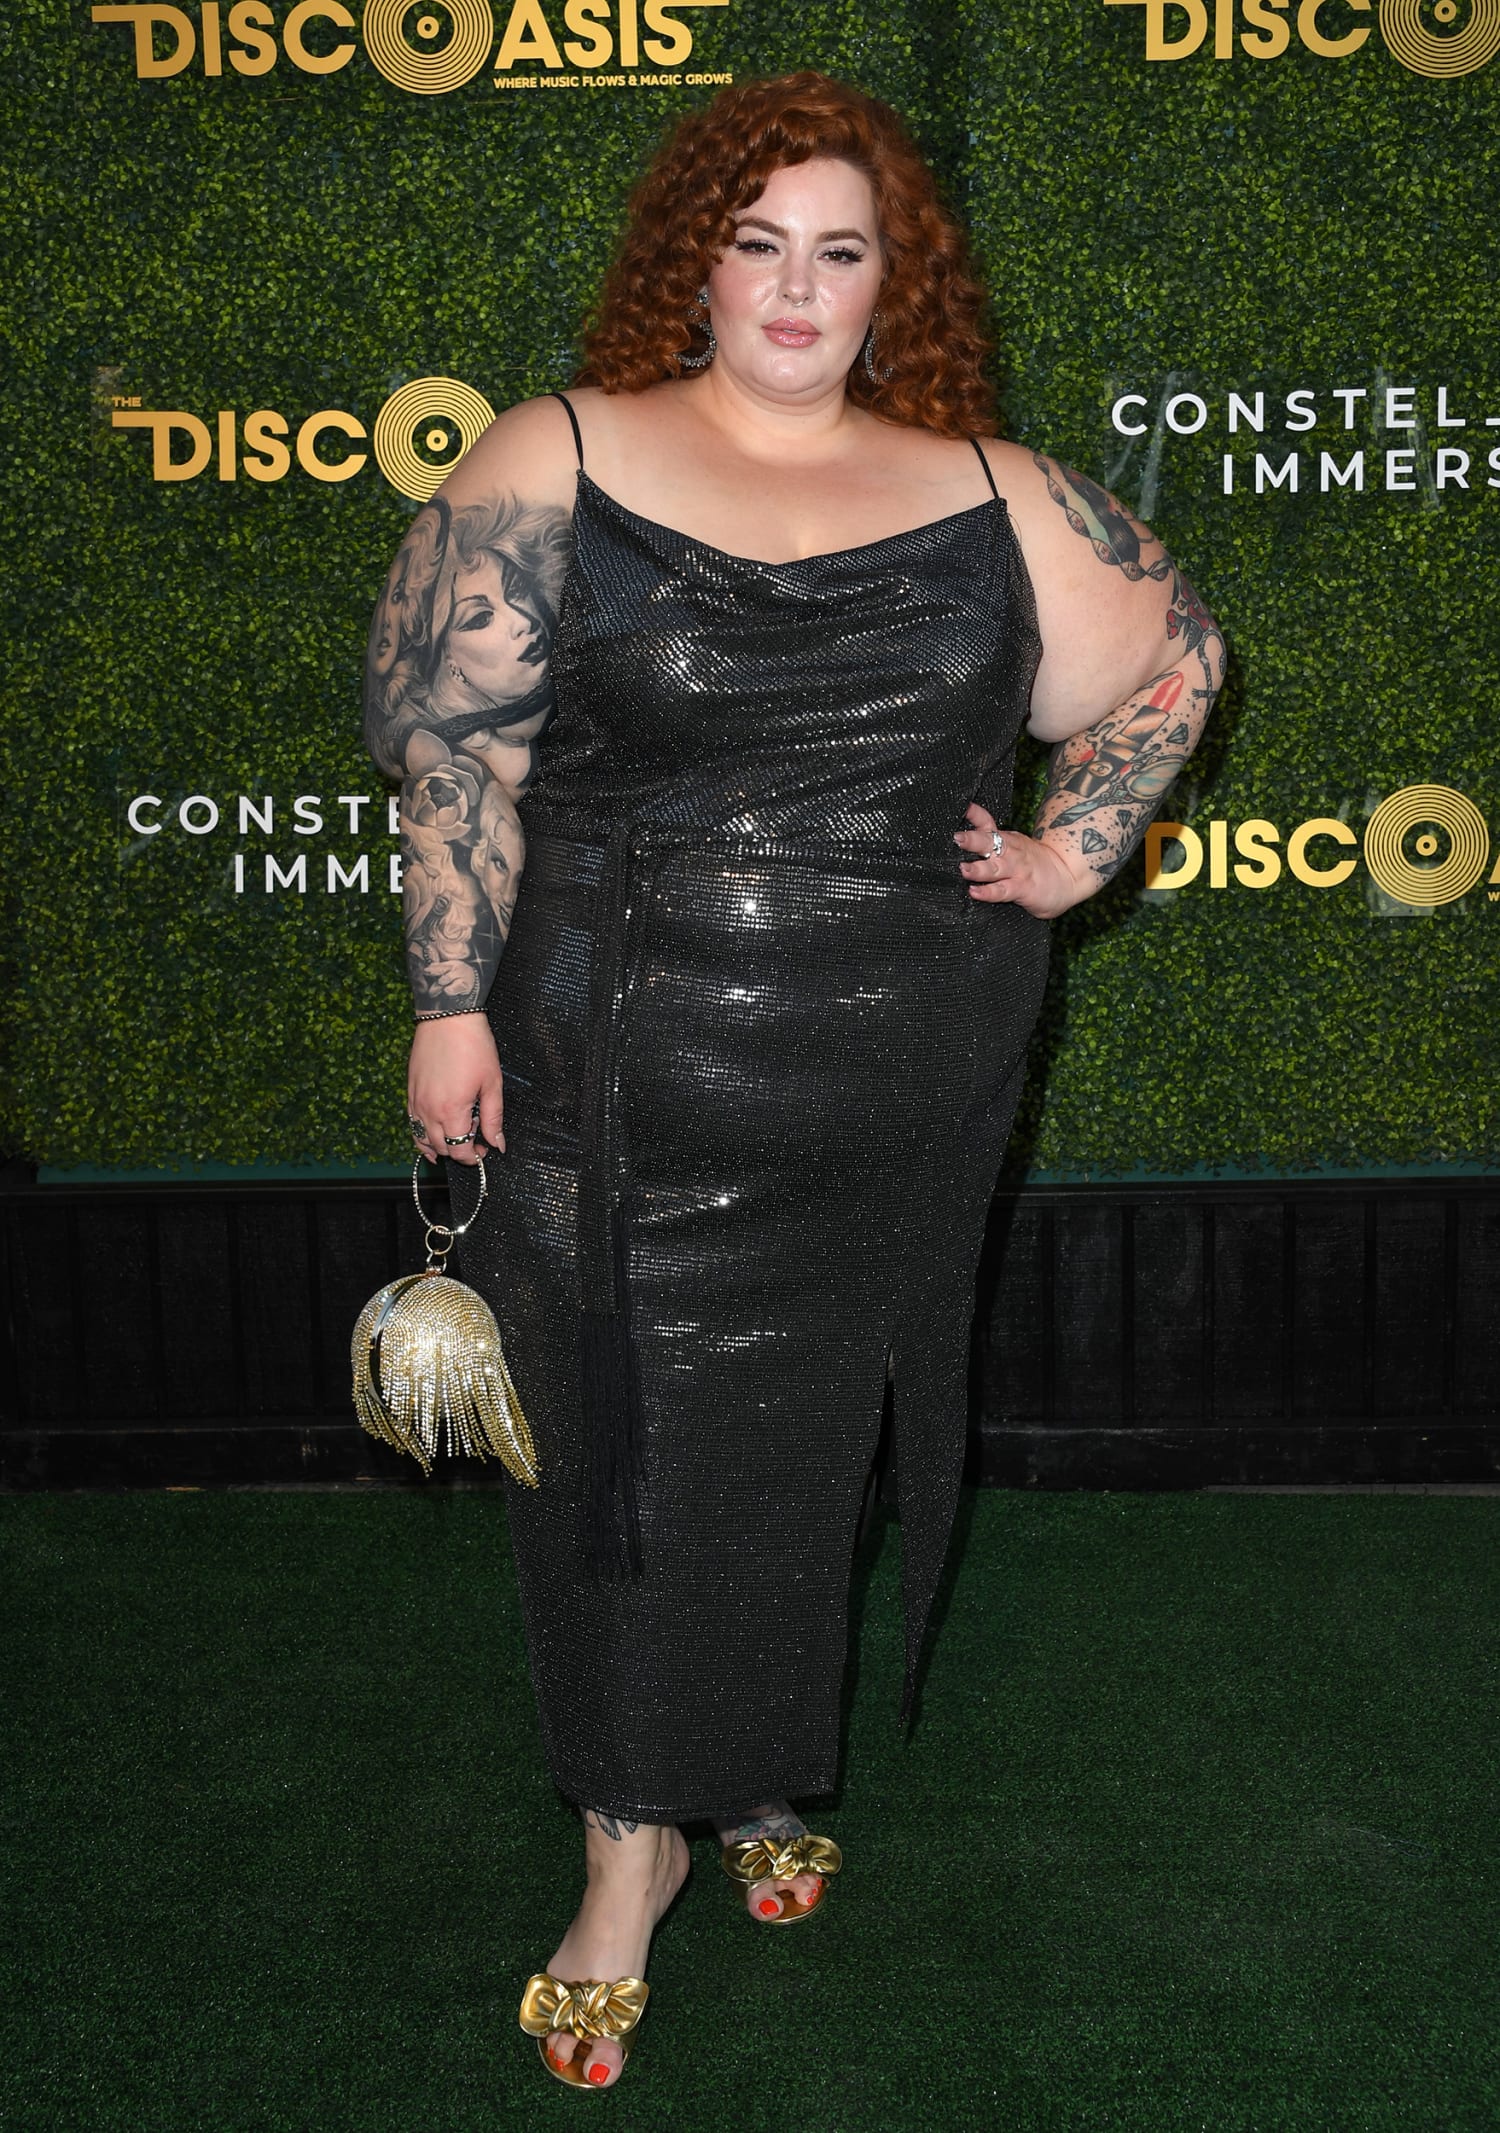 Tess Holliday: I was as shocked as everyone when I learned I had